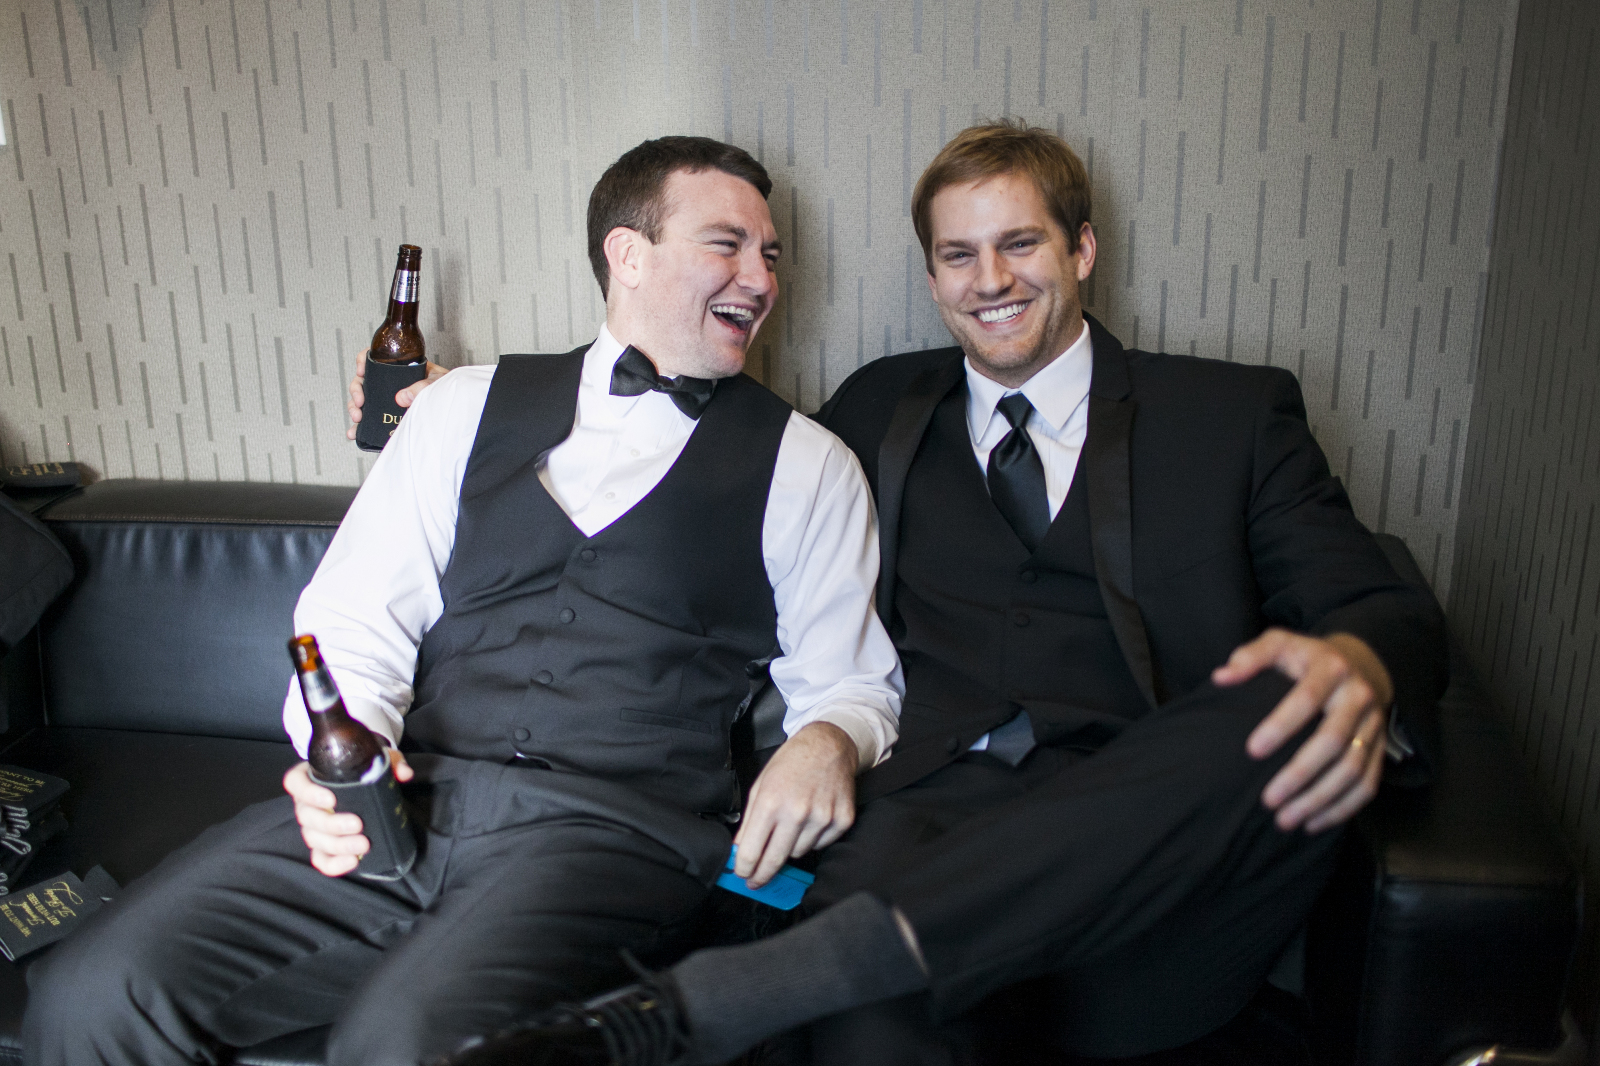 groom and groomsmen wait in the greenroom for the wedding ceremony at the bridge building in nashville